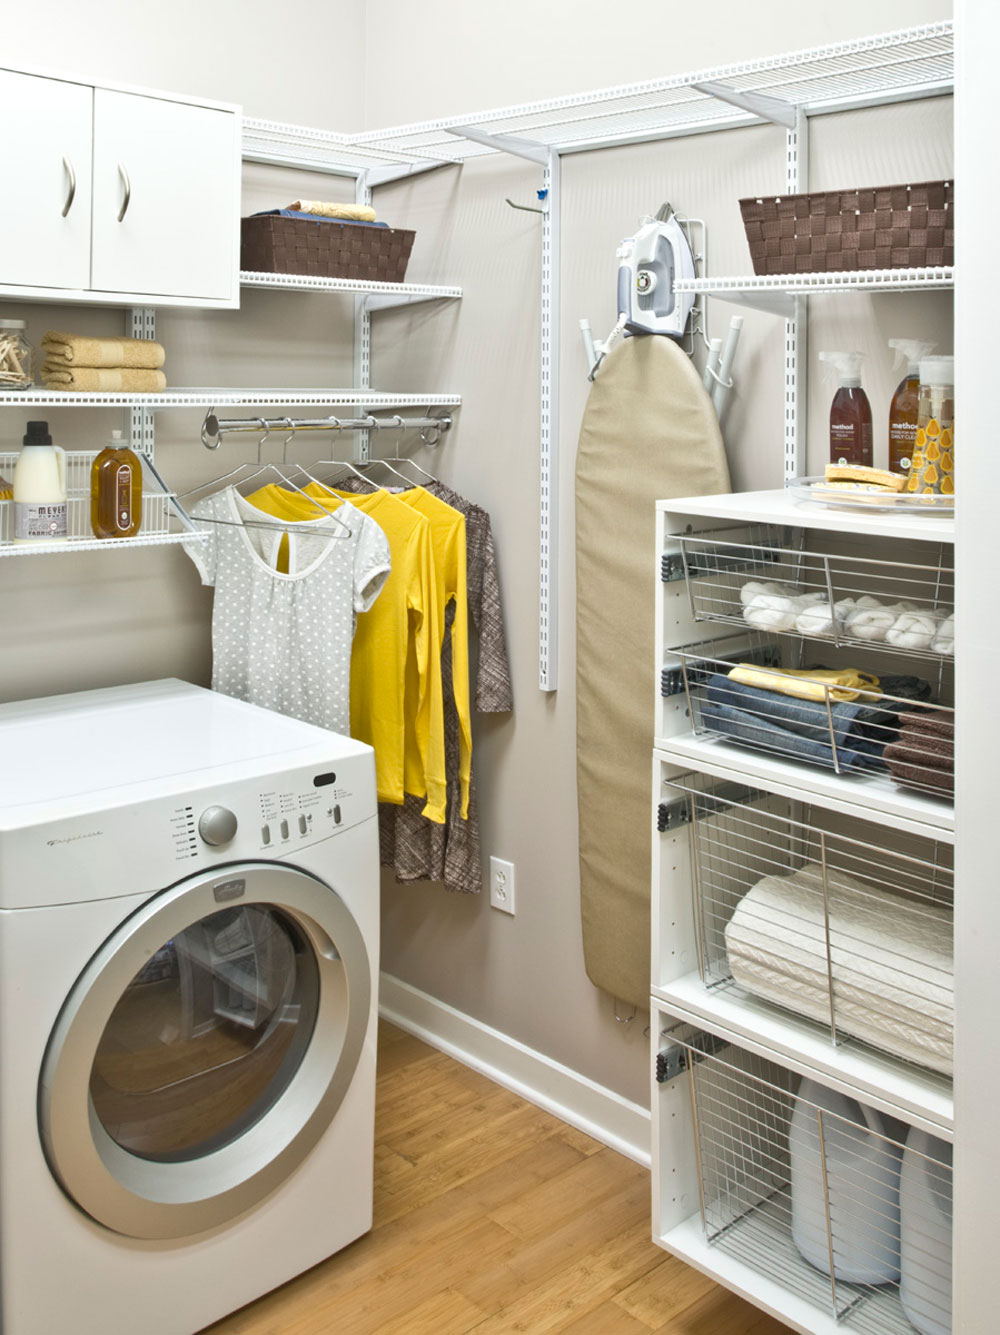 Laundry-room-ideas-for-a-clean-house-6 laundry-room-ideas for a clean house